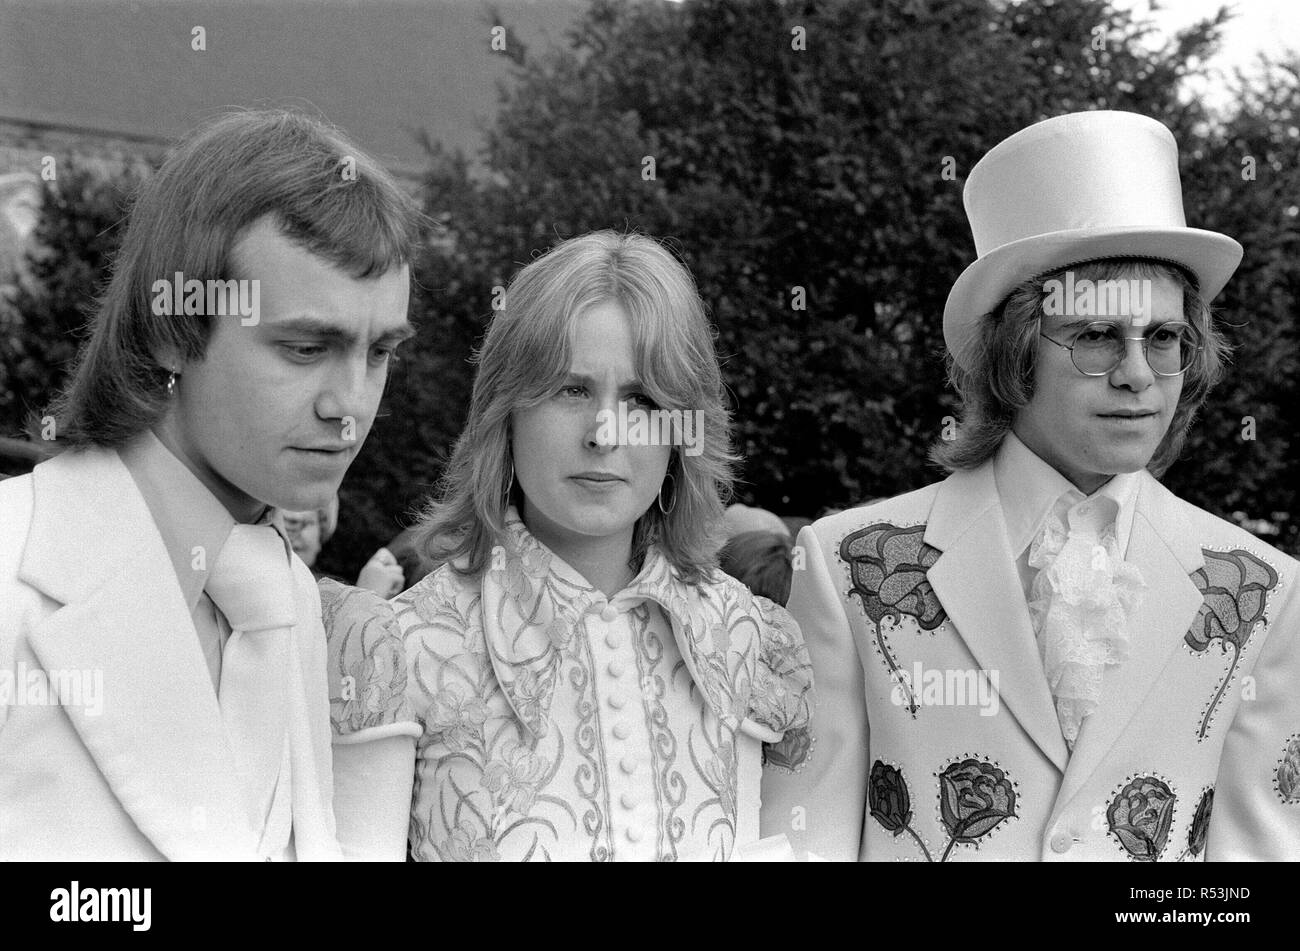 Elton John (right) pictured here as best man to his songwriting partner Bernie Taupin.  Bernie marries 19 year old American student Maxine Feibelman on Saturday 27th March 1971 at  Holy Rood Catholic Church, in Market Rasen, Lincolnshire.  Best man Elton wears a white suit embroided with red and yellow roses, and a white silk top hat. All made in Los Angeles, by the same tailer who has designed suits for Elvis Presley. (Tailer is named in captioned but writing difficult to make out)  Bride Maxine, wears a full length traditional gown in white with old gold irises embroided on the bodice.  Groo Stock Photo